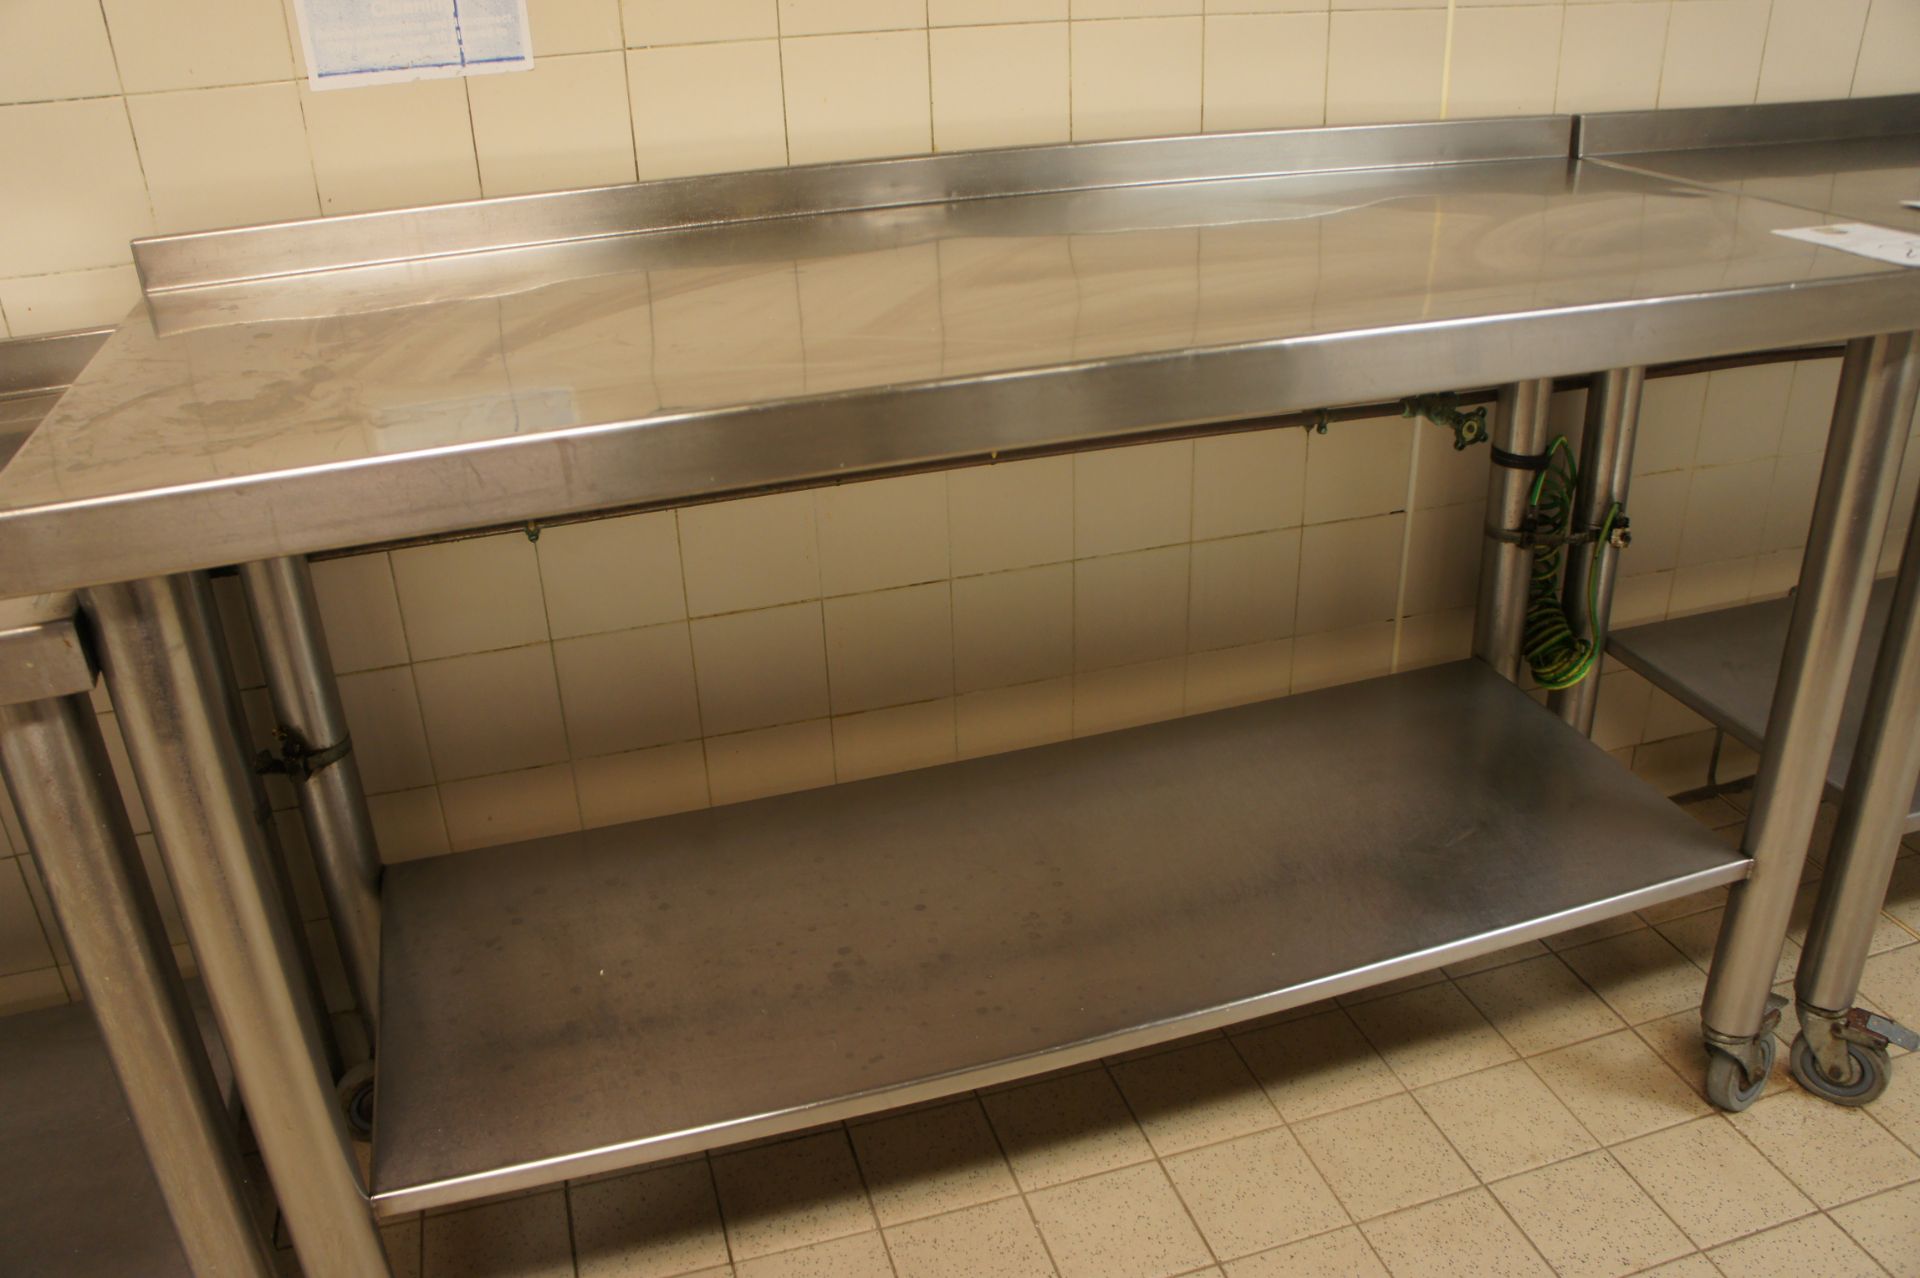 Mobile Stainless steel preparation table with shelf under, 1500mm - Image 2 of 2